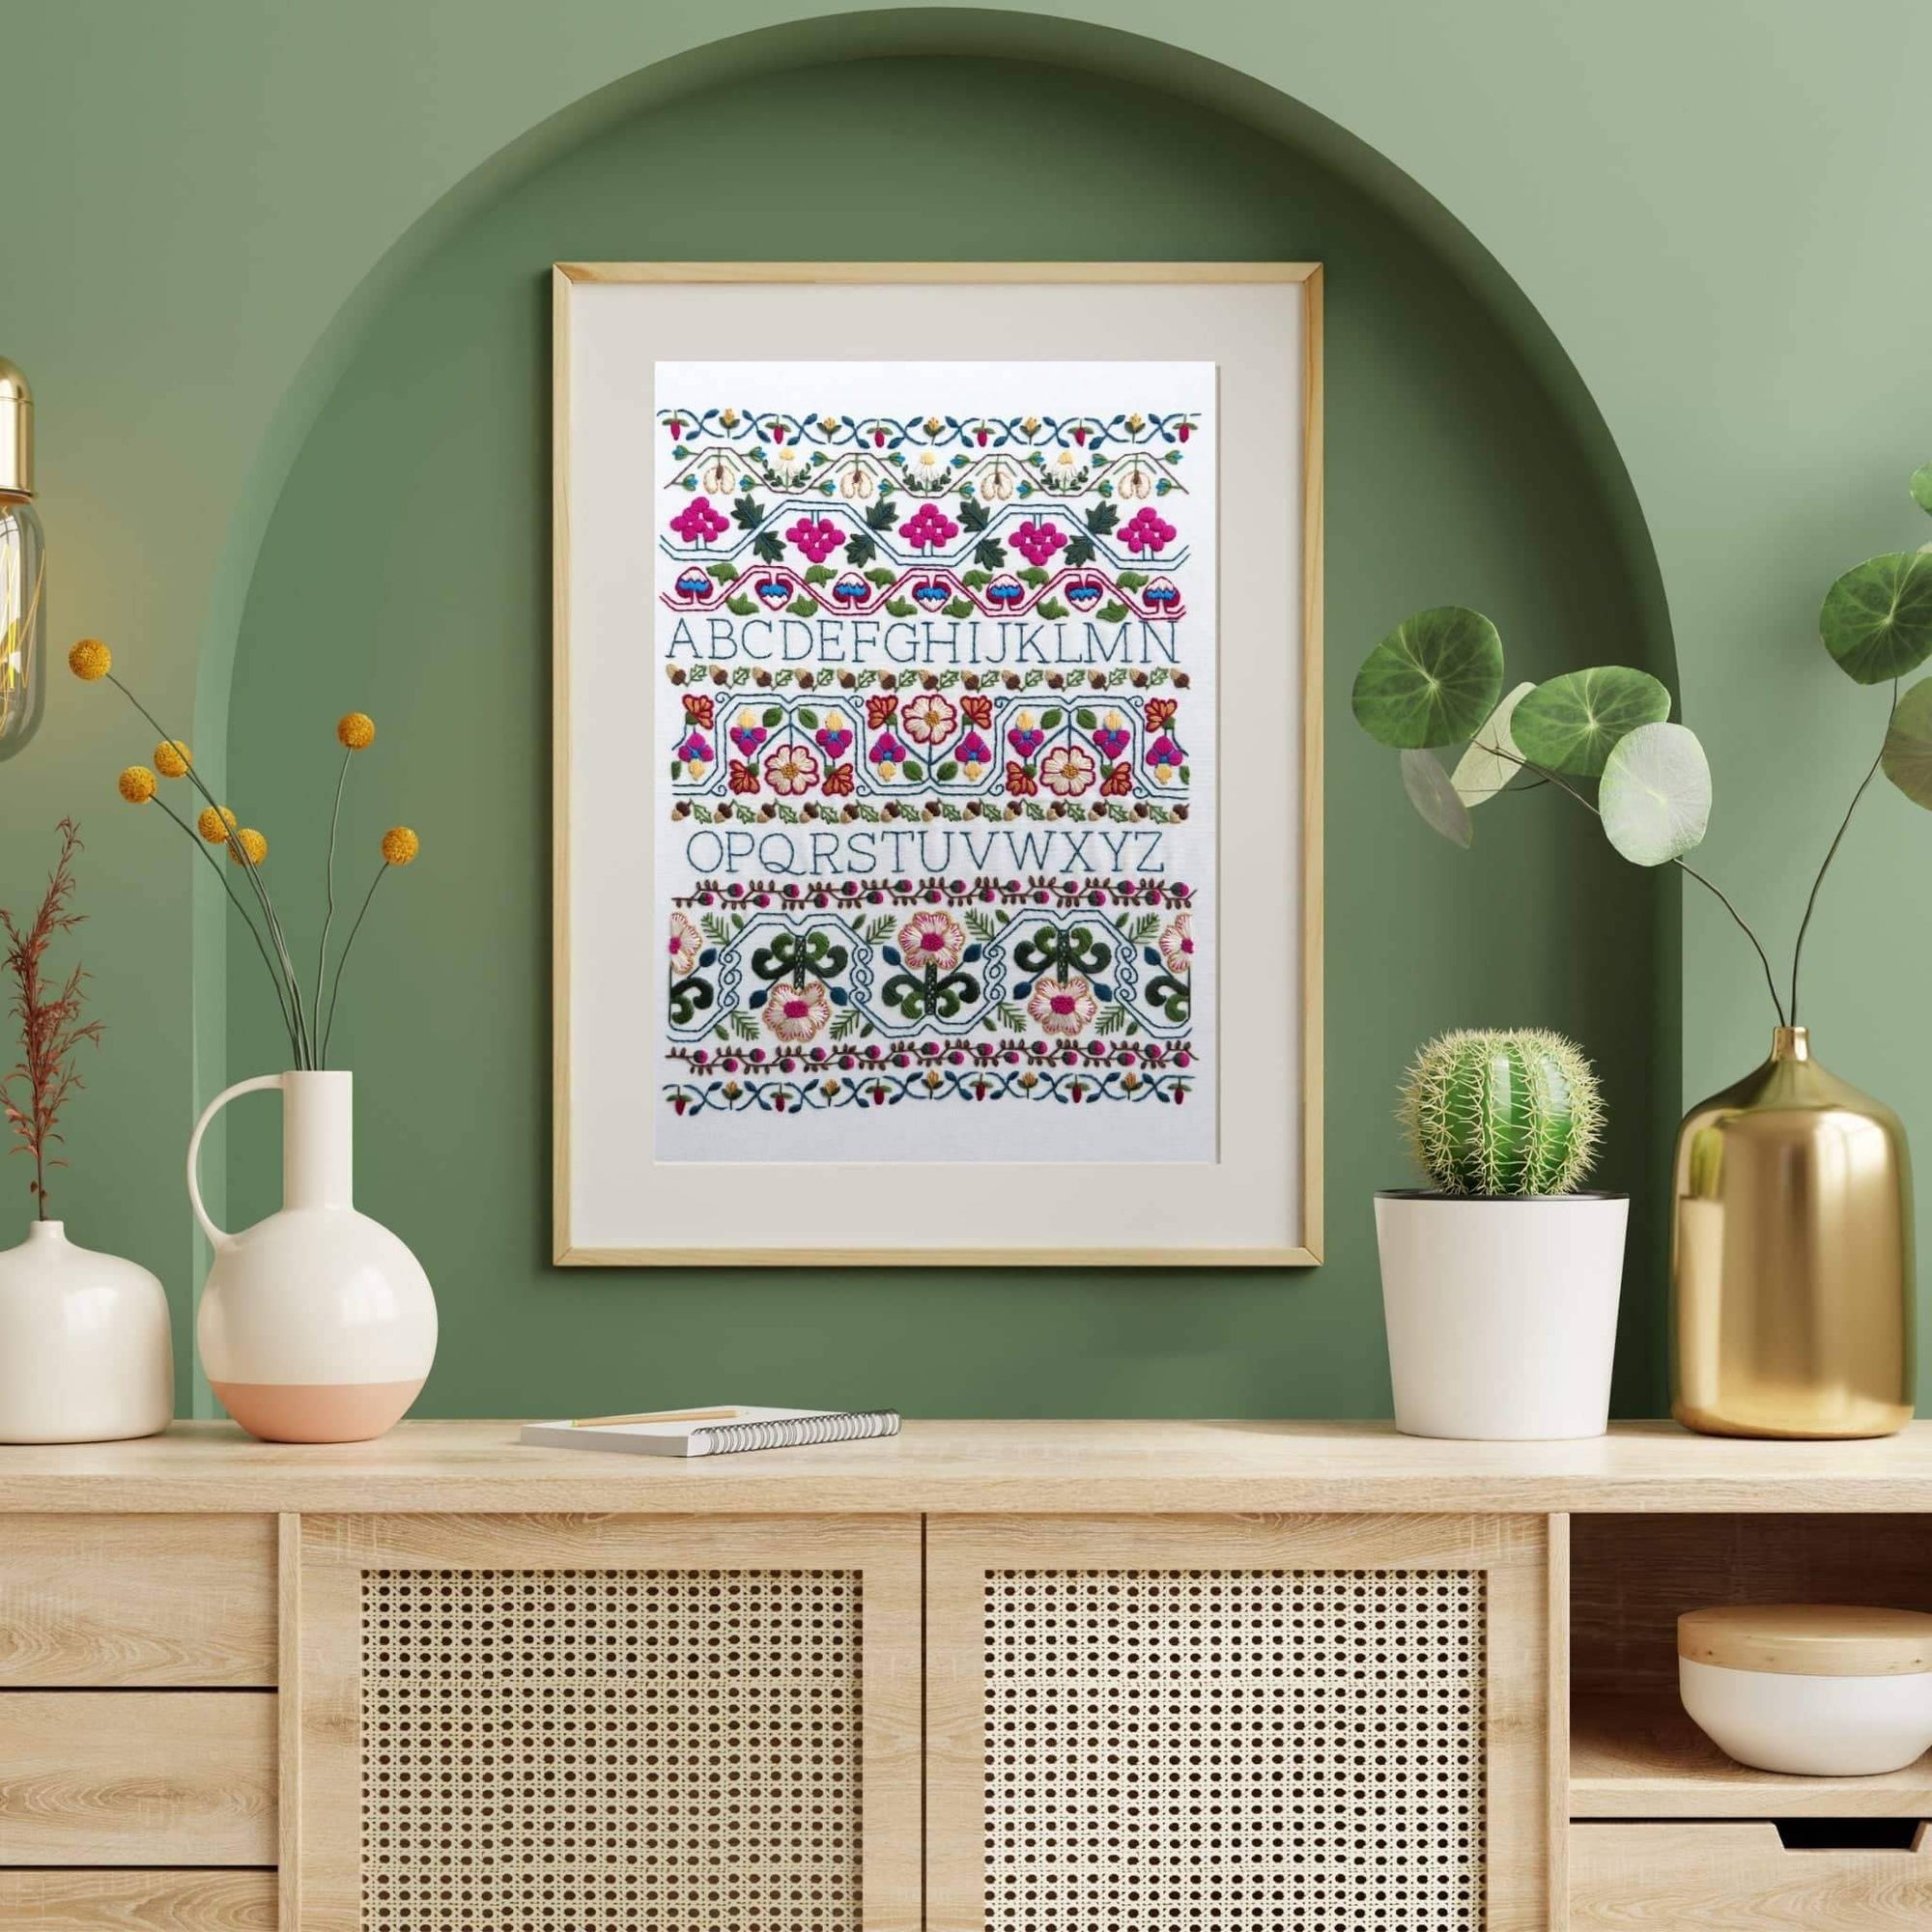 18th Century Sampler Hand Embroidery Pattern , PDF Download , StitchDoodles , Embroidery, embroidery hoop, embroidery hoop kit, Embroidery Kit, embroidery kit for adults, embroidery kit fro beginners, embroidery pattern, hand embroidery, hand embroidery fabric, hand embroidery seat frame, modern embroidery kits, nurge embroidery hoop, PDF pattern, Printed Pattern , StitchDoodles , shop.stitchdoodles.com